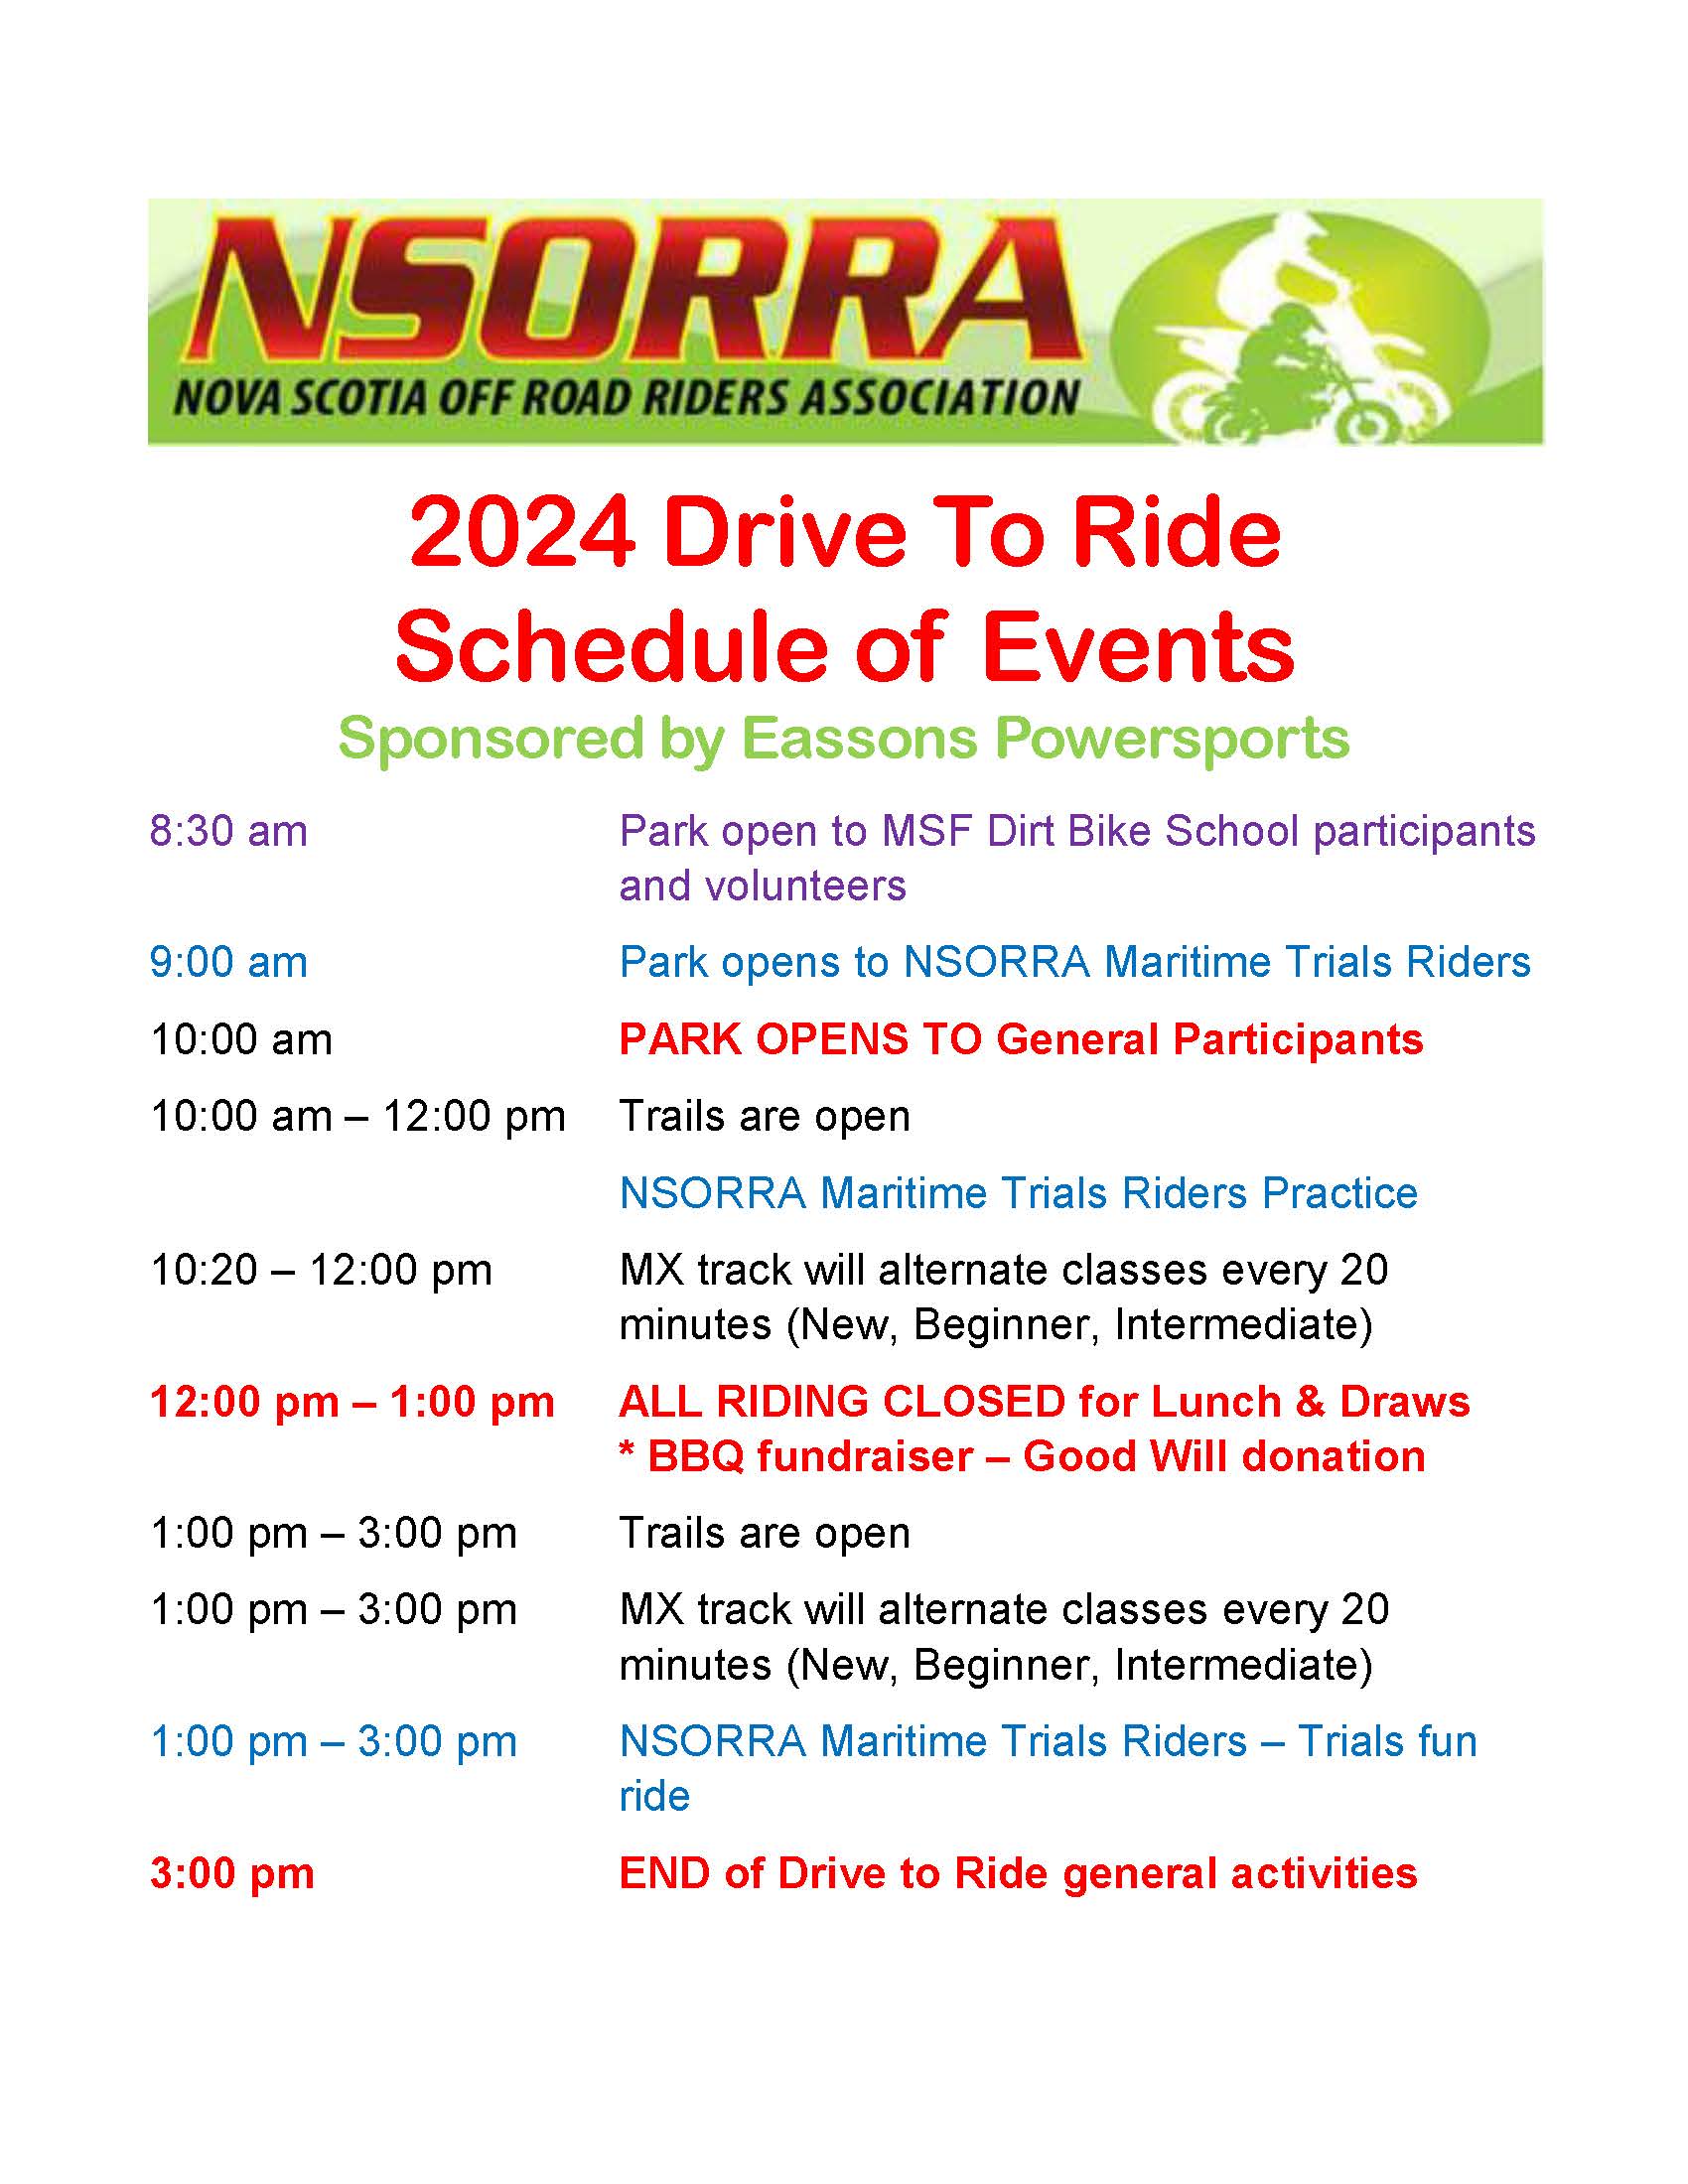 the 2024 Drive to Ride schedule